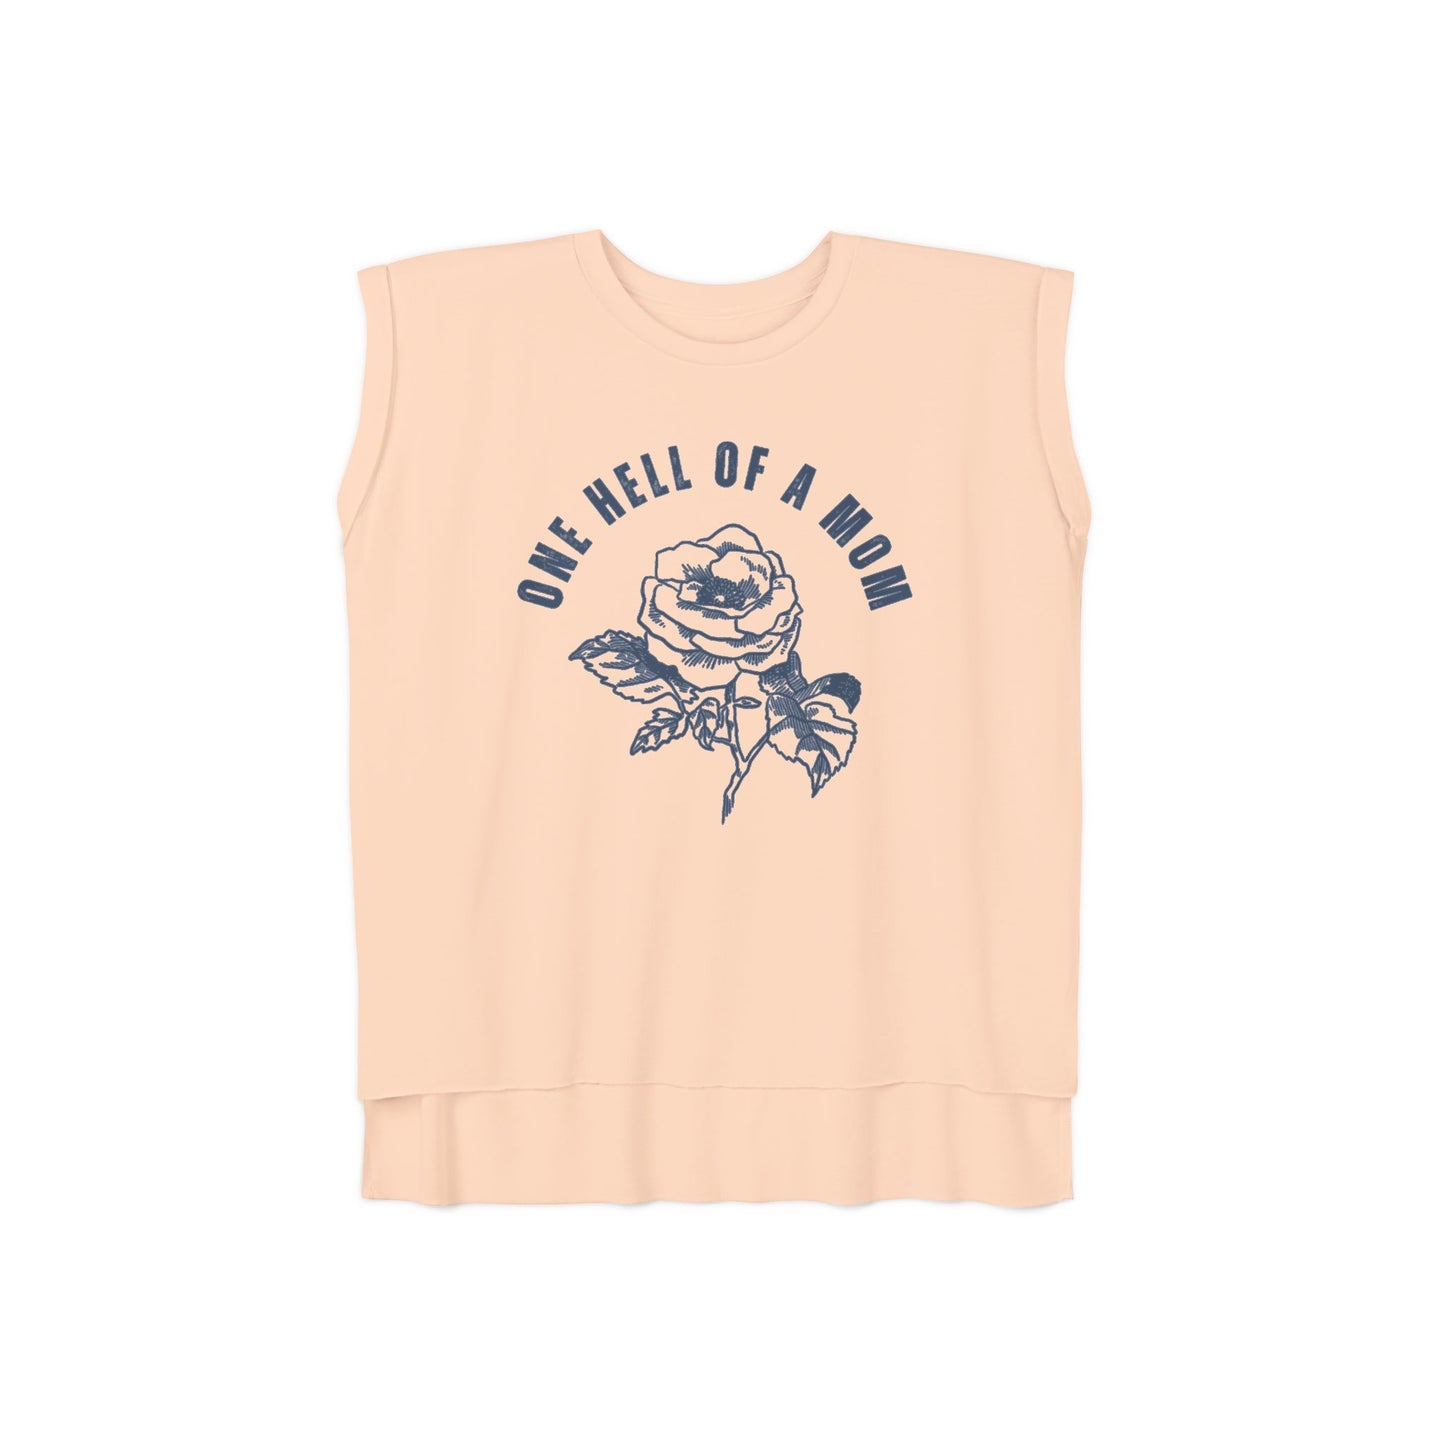 One Hell of a Mom Women’s Flowy Rolled Cuffs Muscle Tee